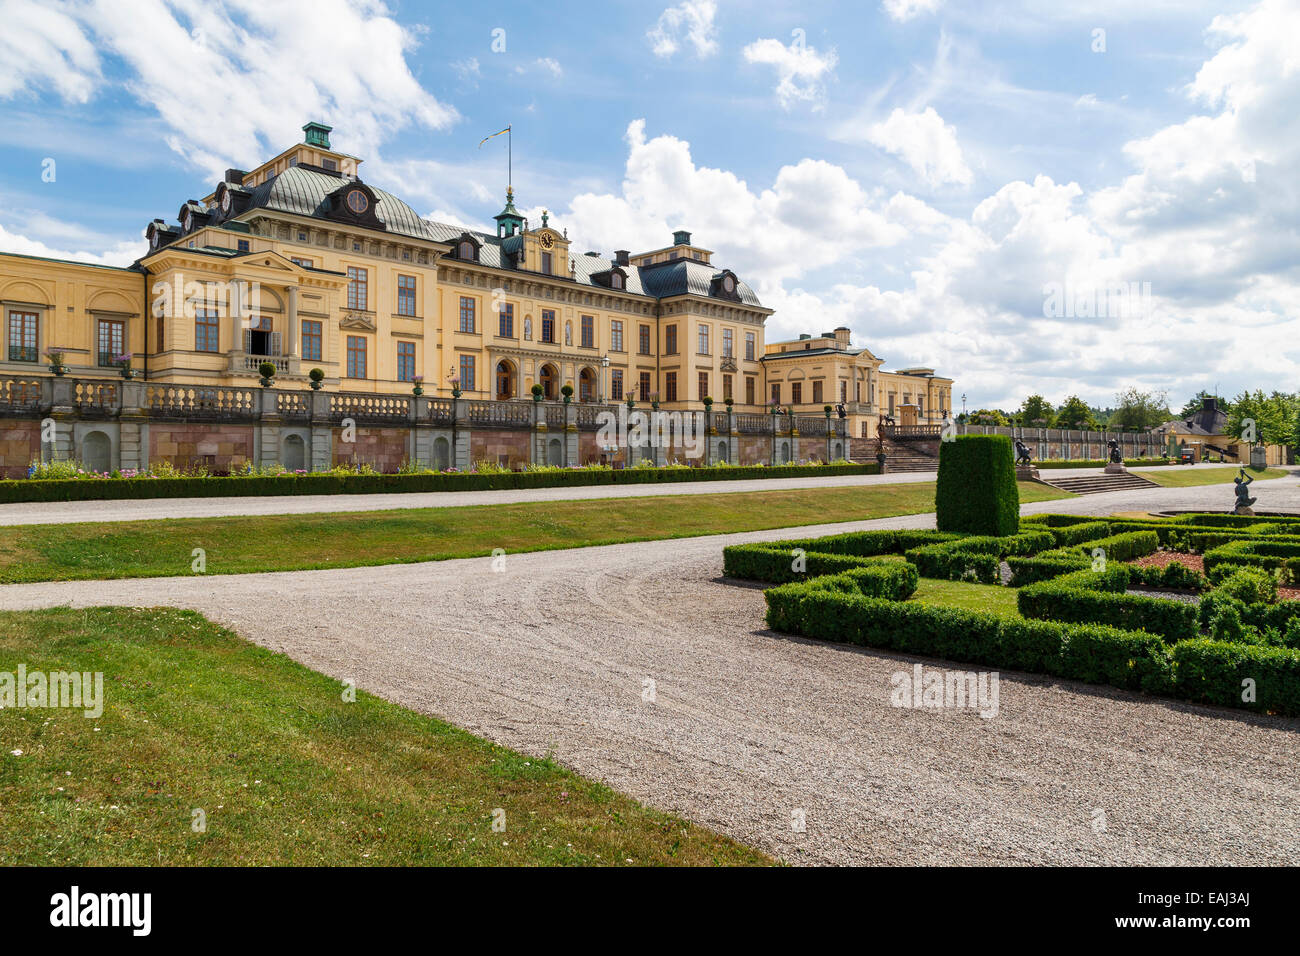 Rear of Drottningholm Palace Park seen from the gardens, Stockholm, Sweden Stock Photo